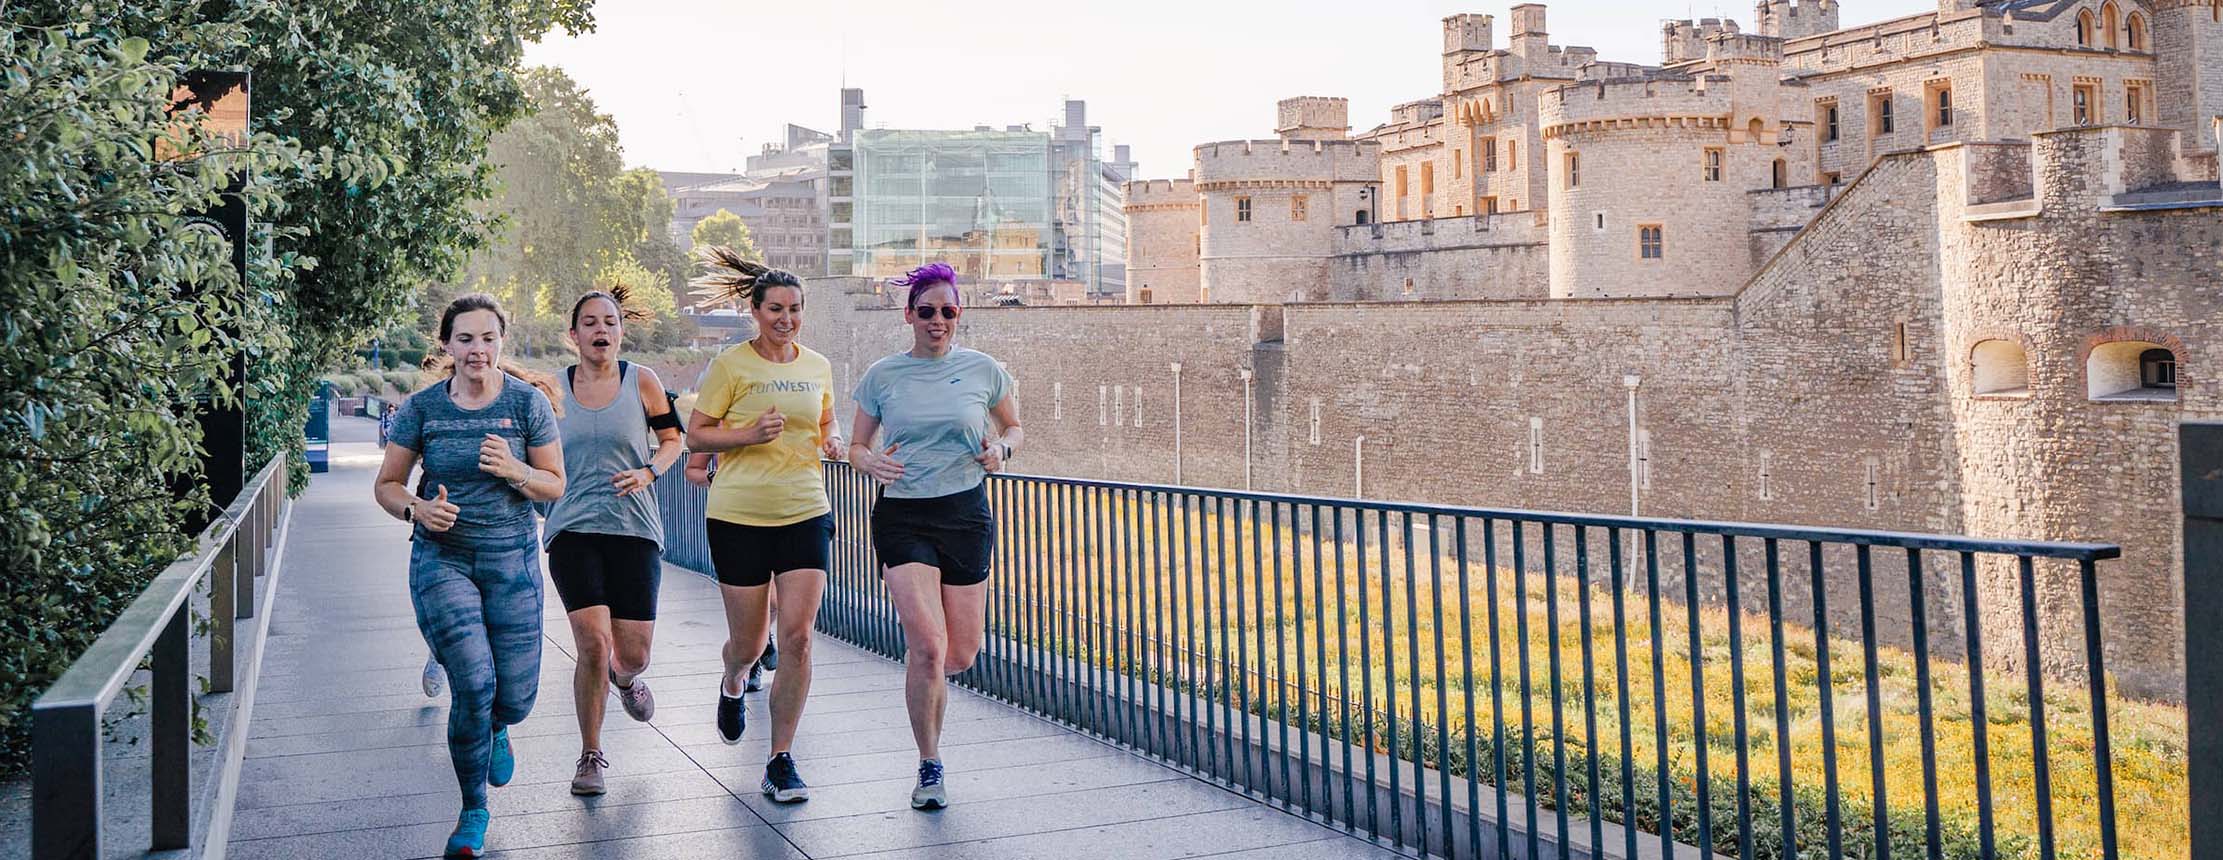 Group of runners run past the tower of london